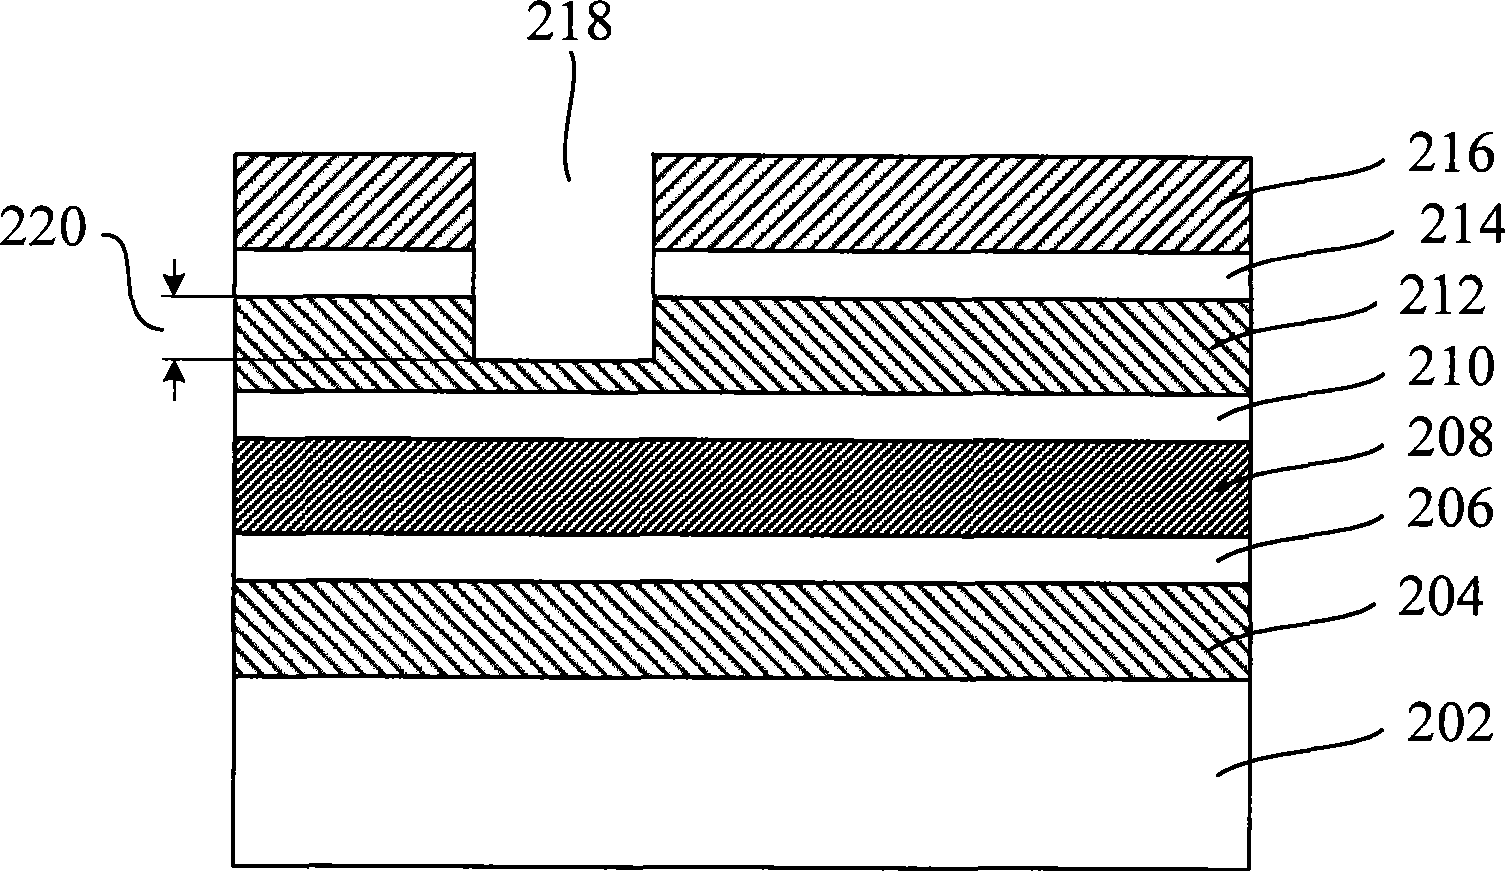 Connection pore forming method